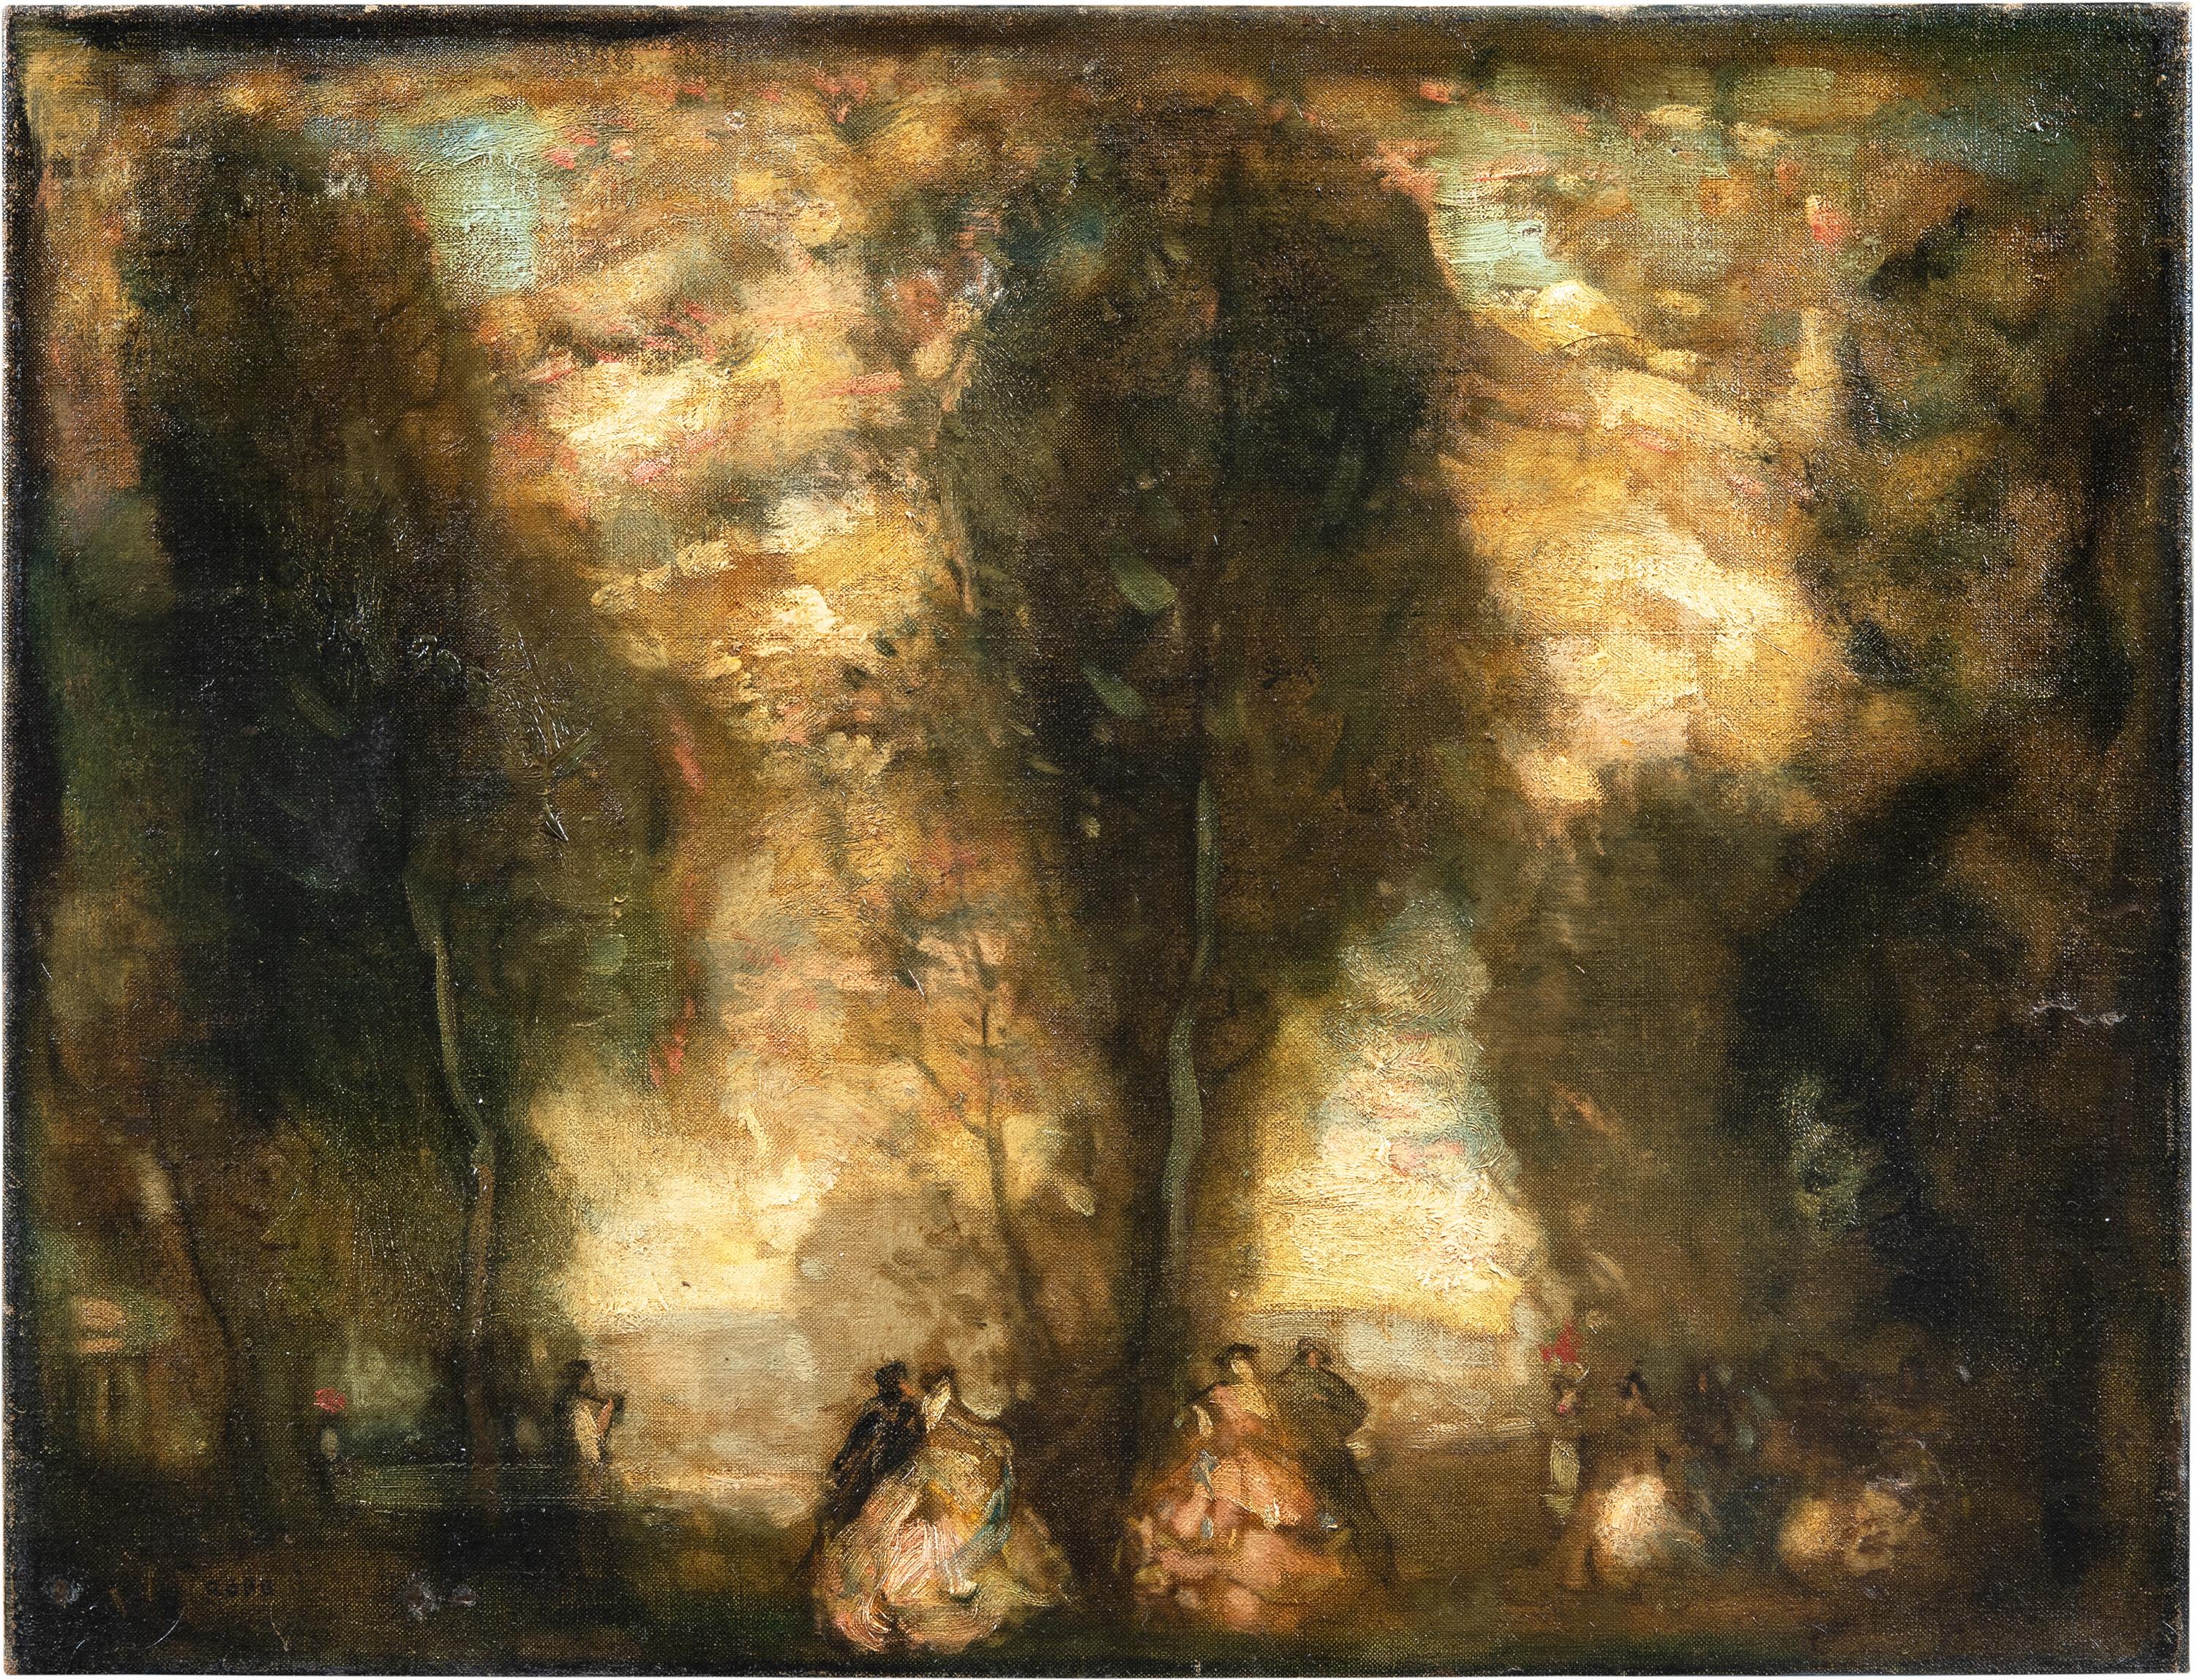 William George Robb (1872 - 1940) - Gallant figurines in the woods.

43 x 60cm.

Oil on canvas, unframed.

- Work signed on the lower left: “ROBB”.

Condition report: Original canvas. Good state of conservation of the pictorial surface, there are